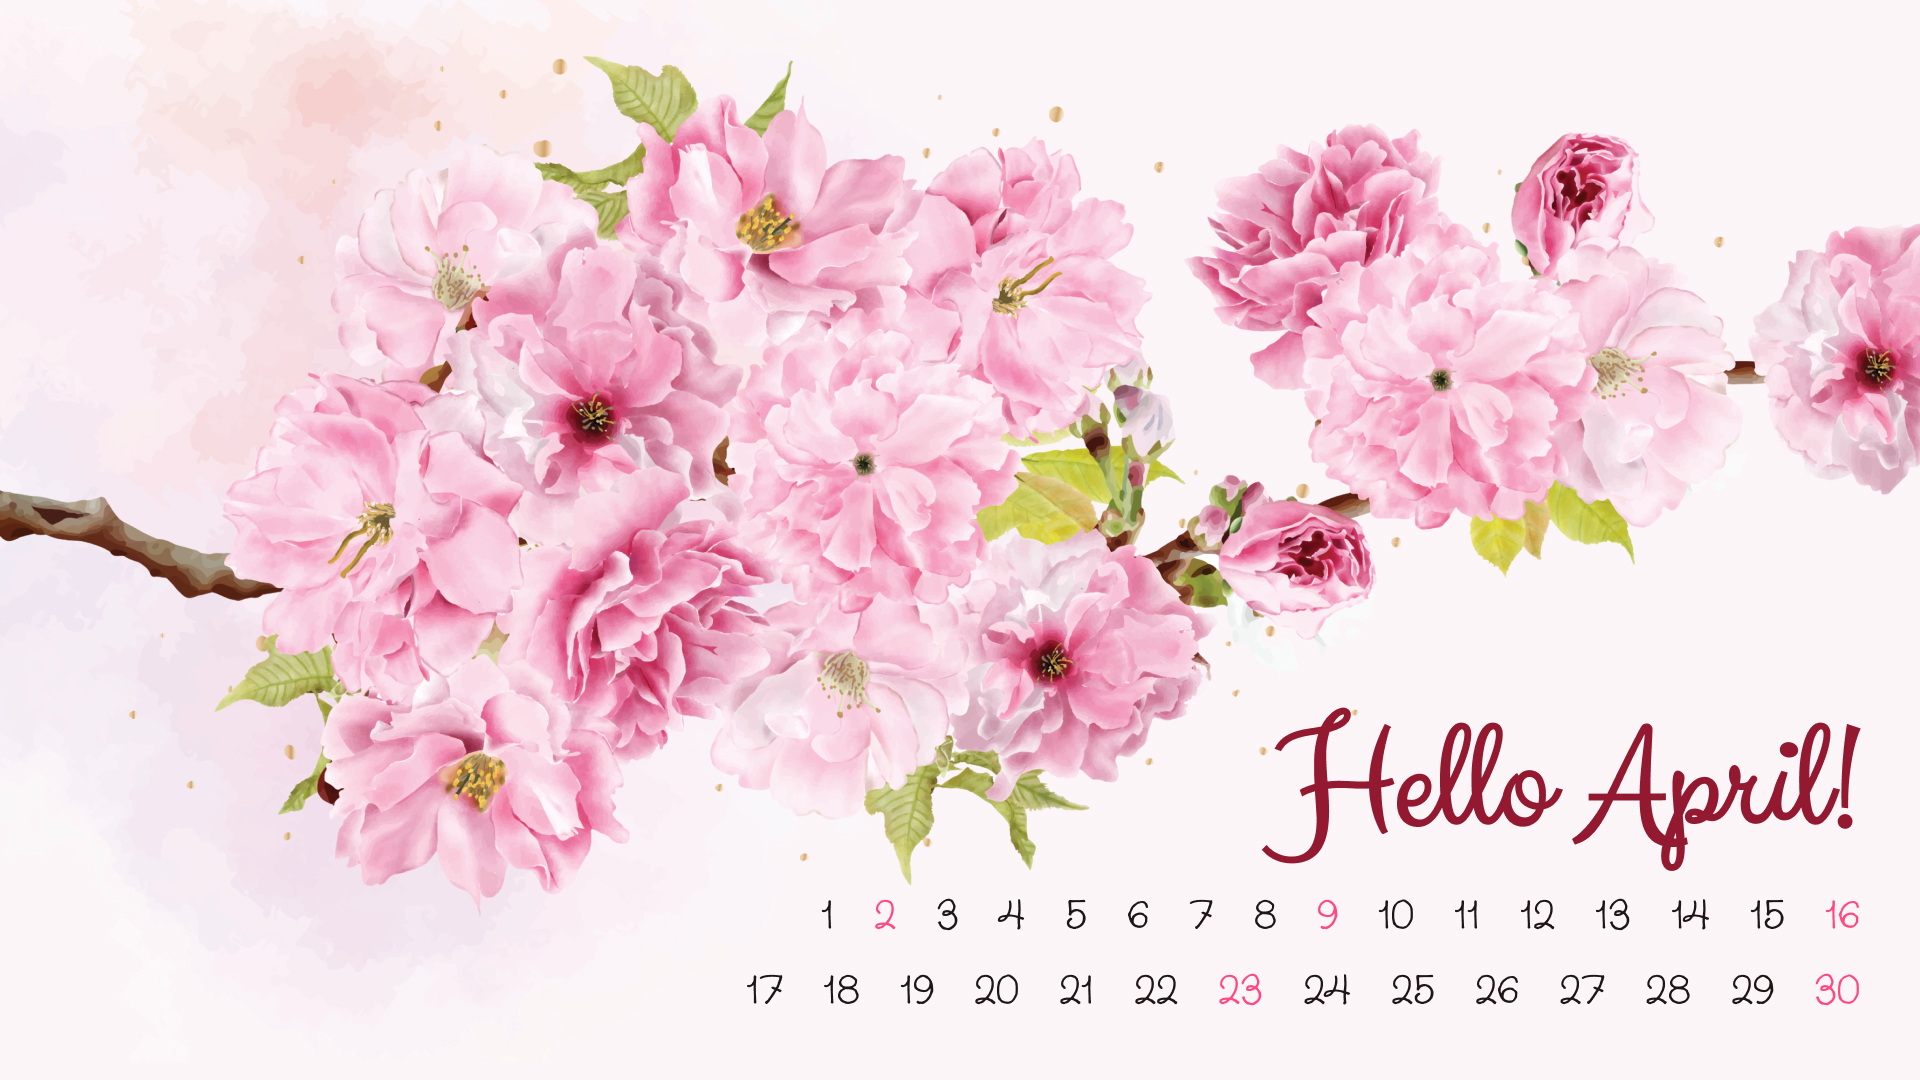 Calendar with a bunch of pink flowers on it.